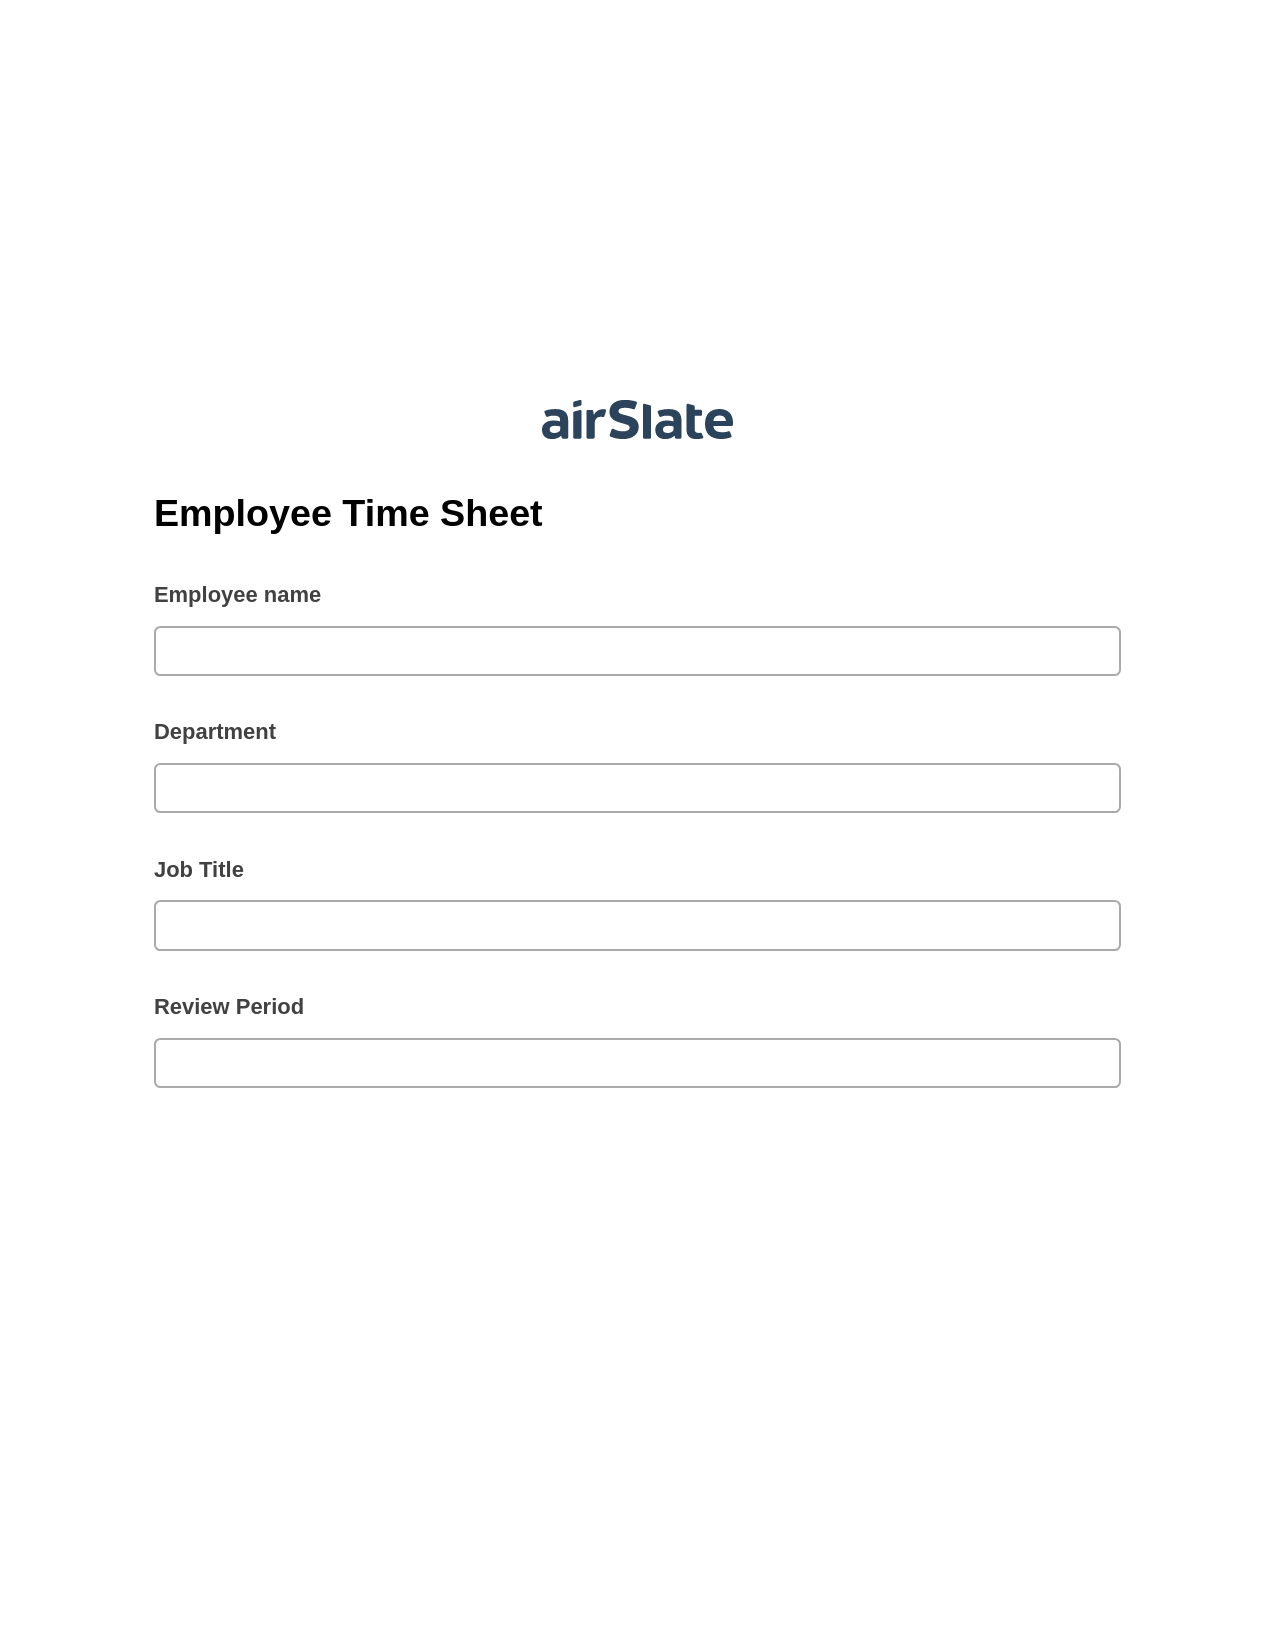 Employee Time Sheet Pre-fill from Salesforce Records with SOQL Bot, Create slate addon, Archive to Box Bot